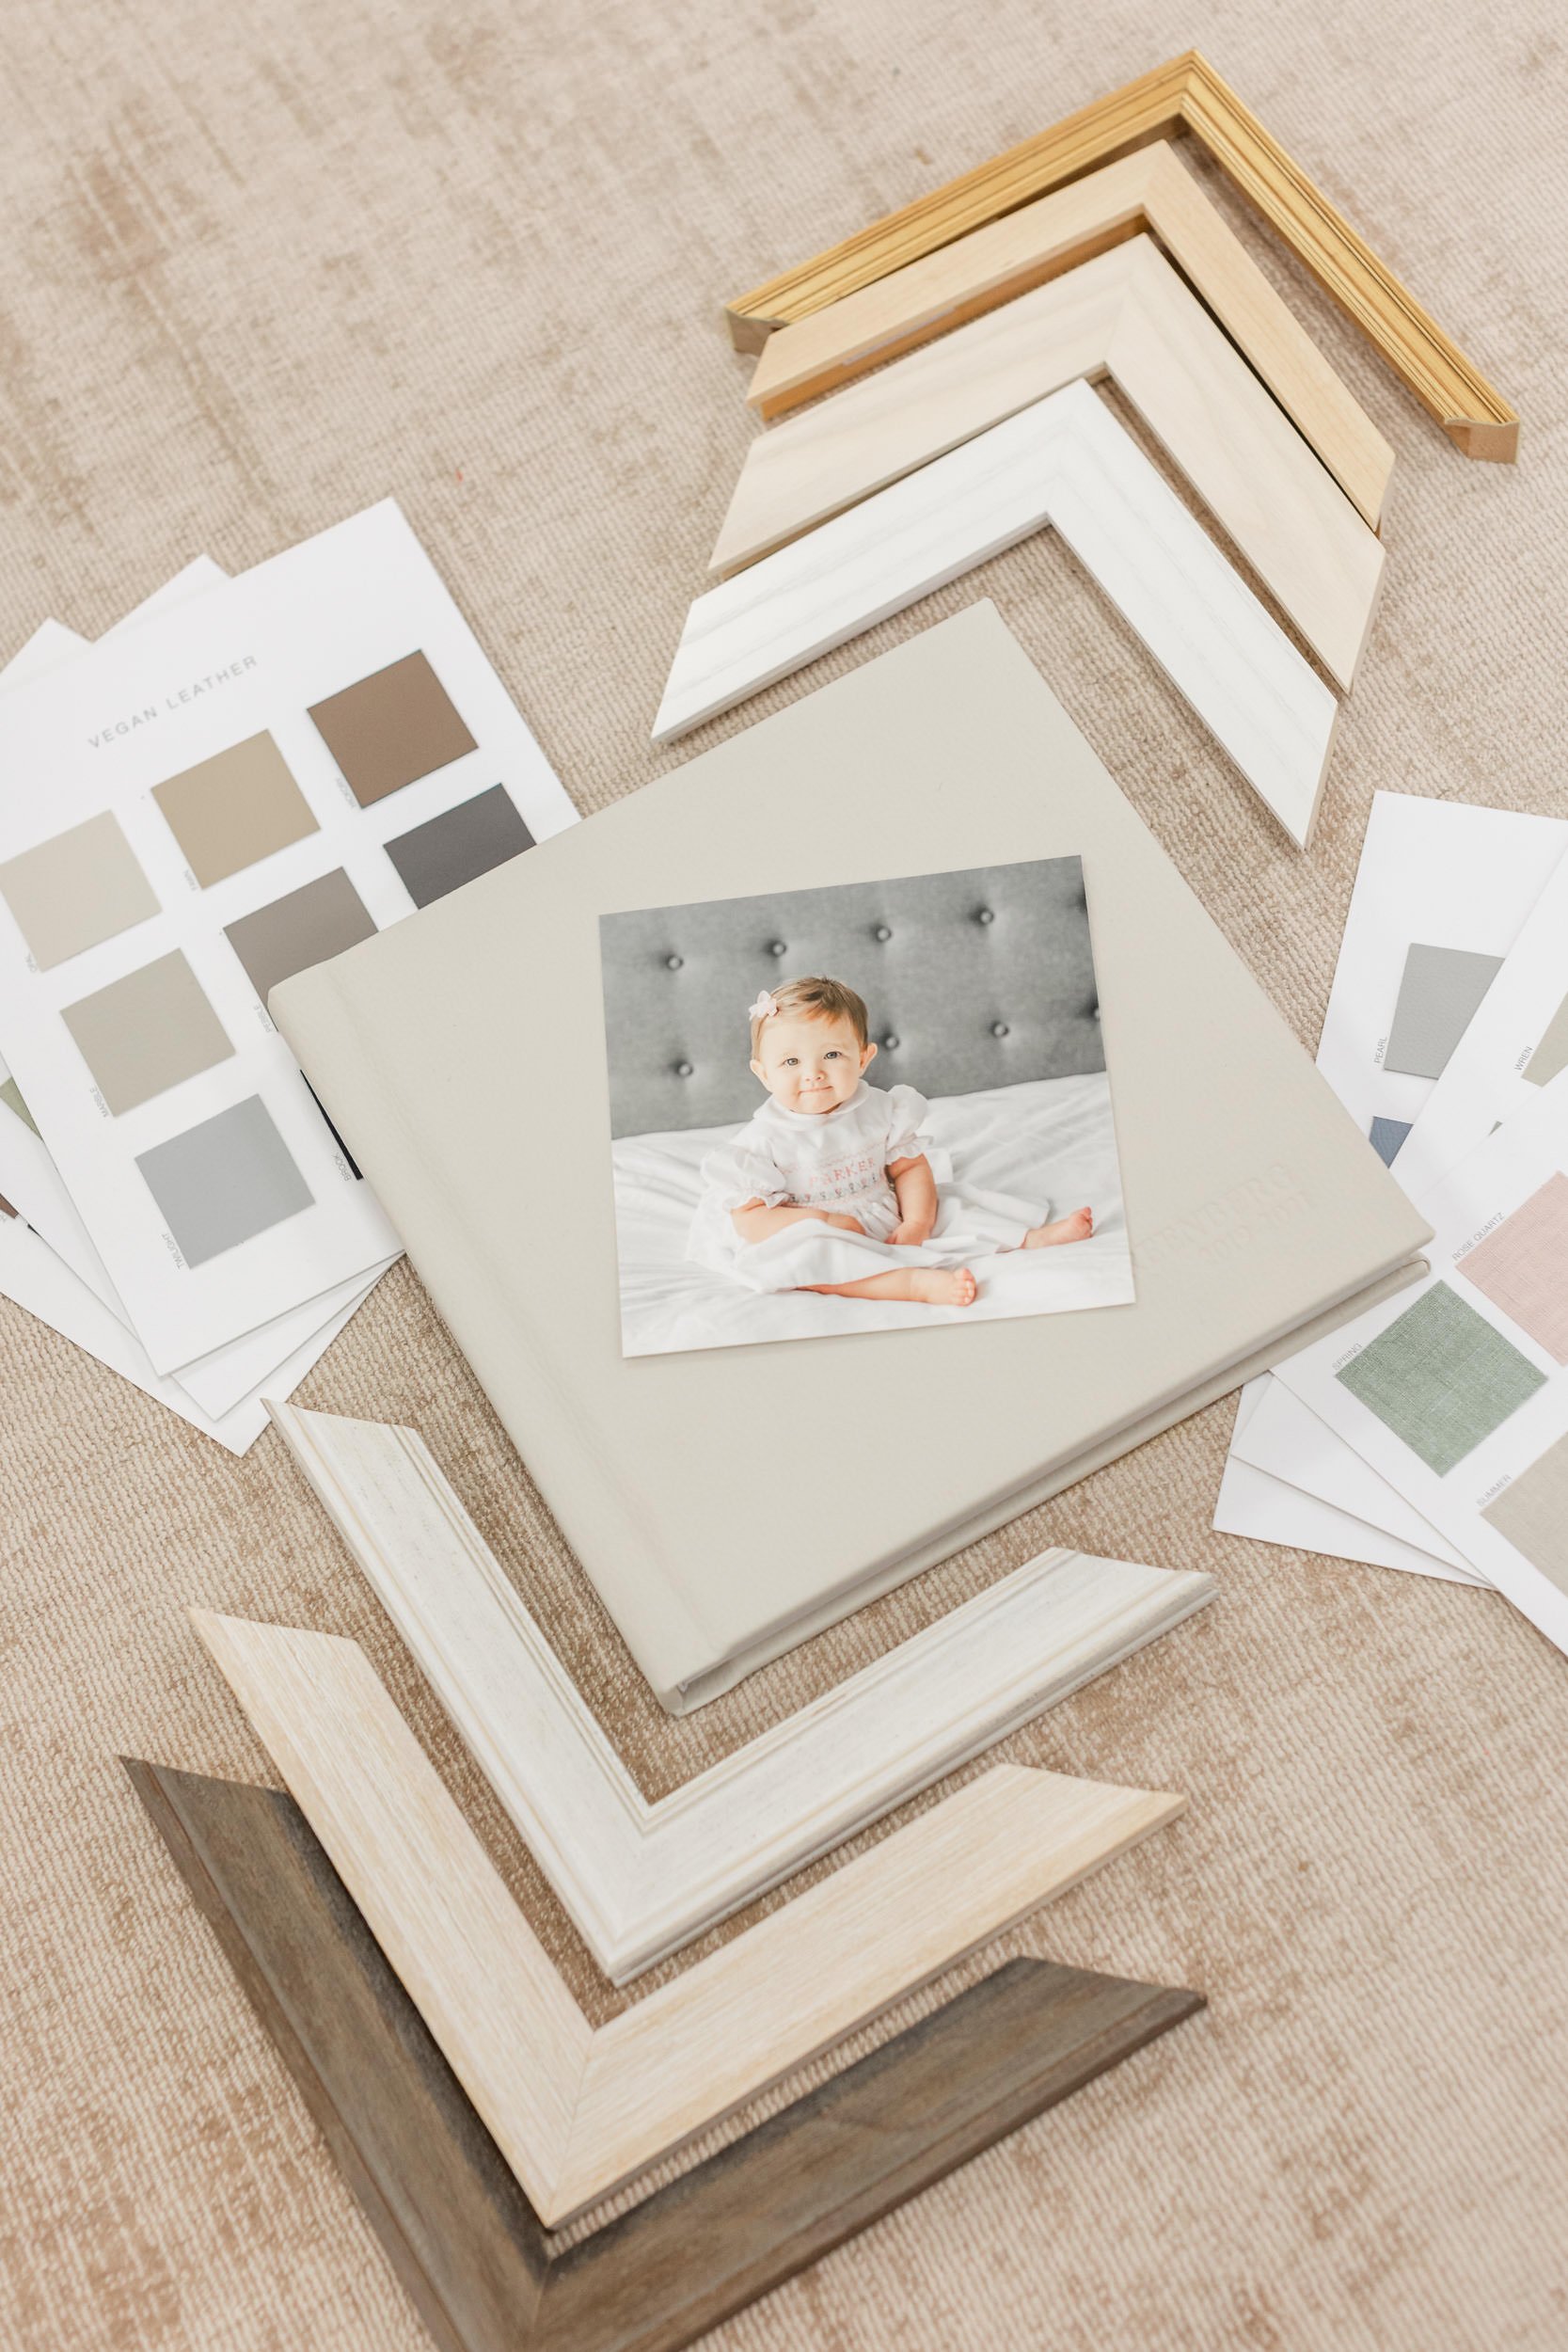   Framing options, including different colors and styles of frames, mats, and photobooks, with a photo of a baby girl. Framing family photos professional family portraits #EssexCountyFamilyPhotographer #BergenCountyFamilyPhotographer #ManhattanFamily